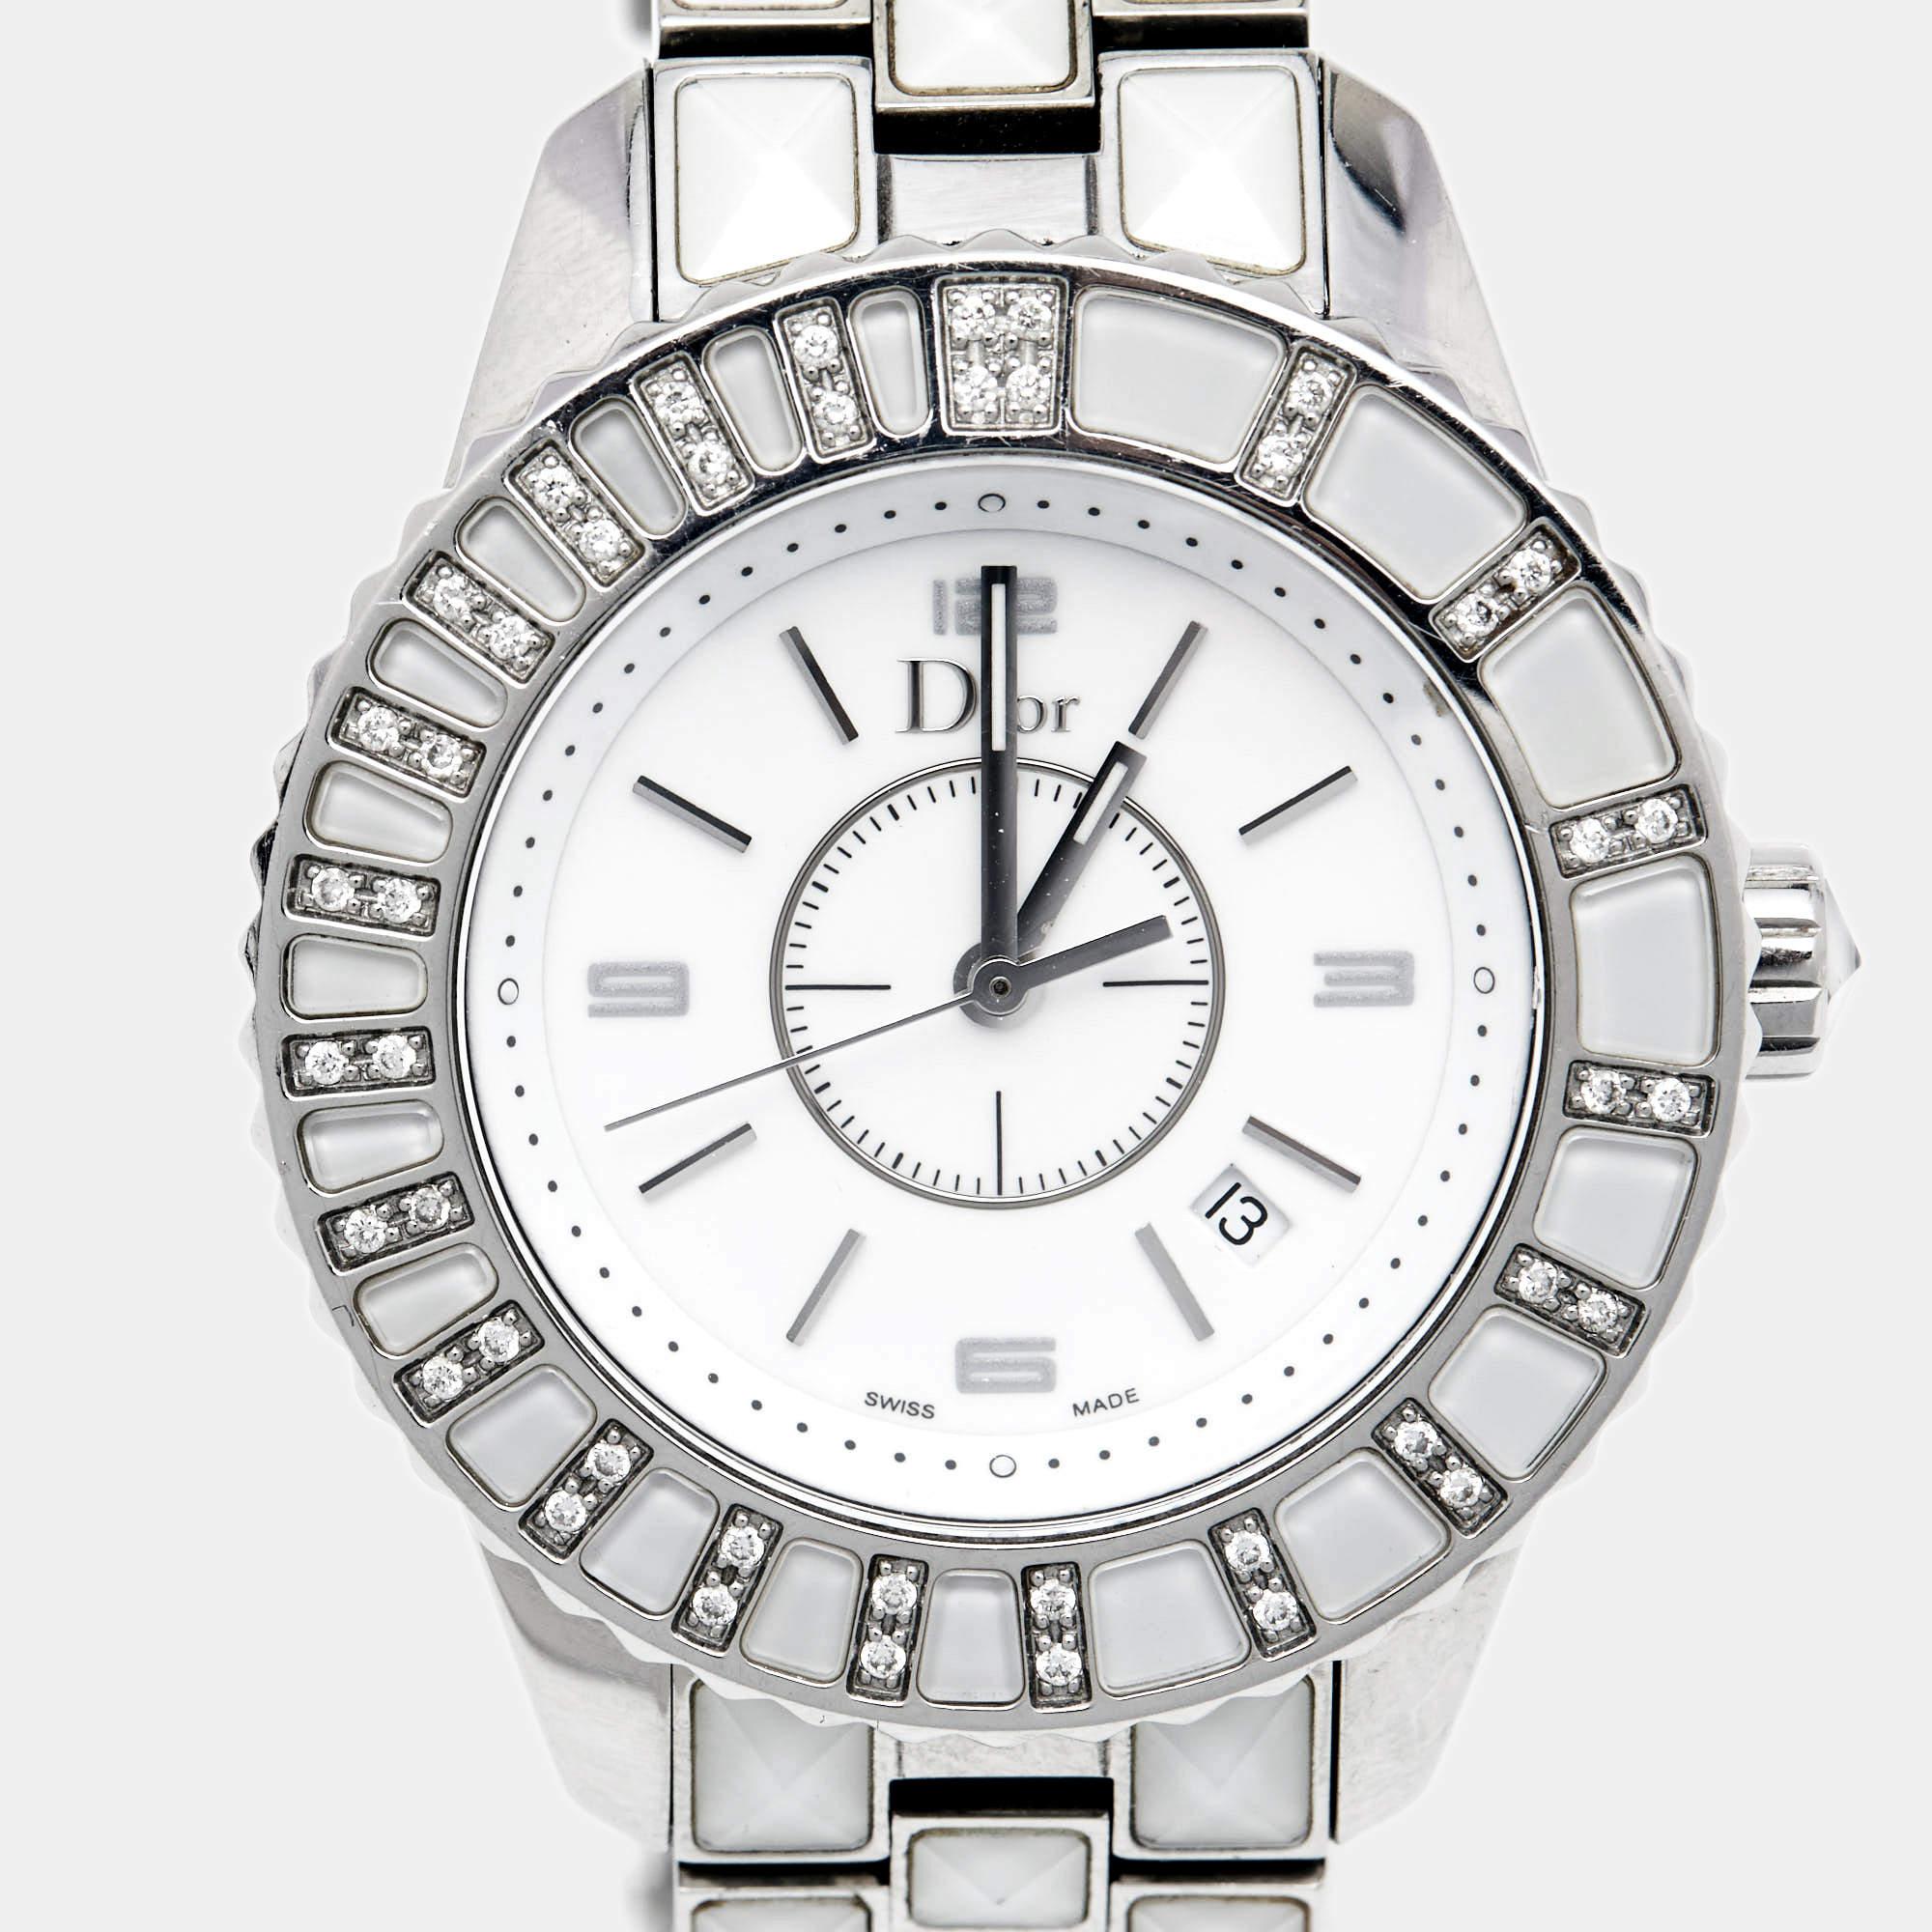 Incorporate Dior's sophisticated style into your ensemble with this exquisite Christal wristwatch. It exhibits the brand's dedication to creativity and its expertise in the art of watchmaking.

